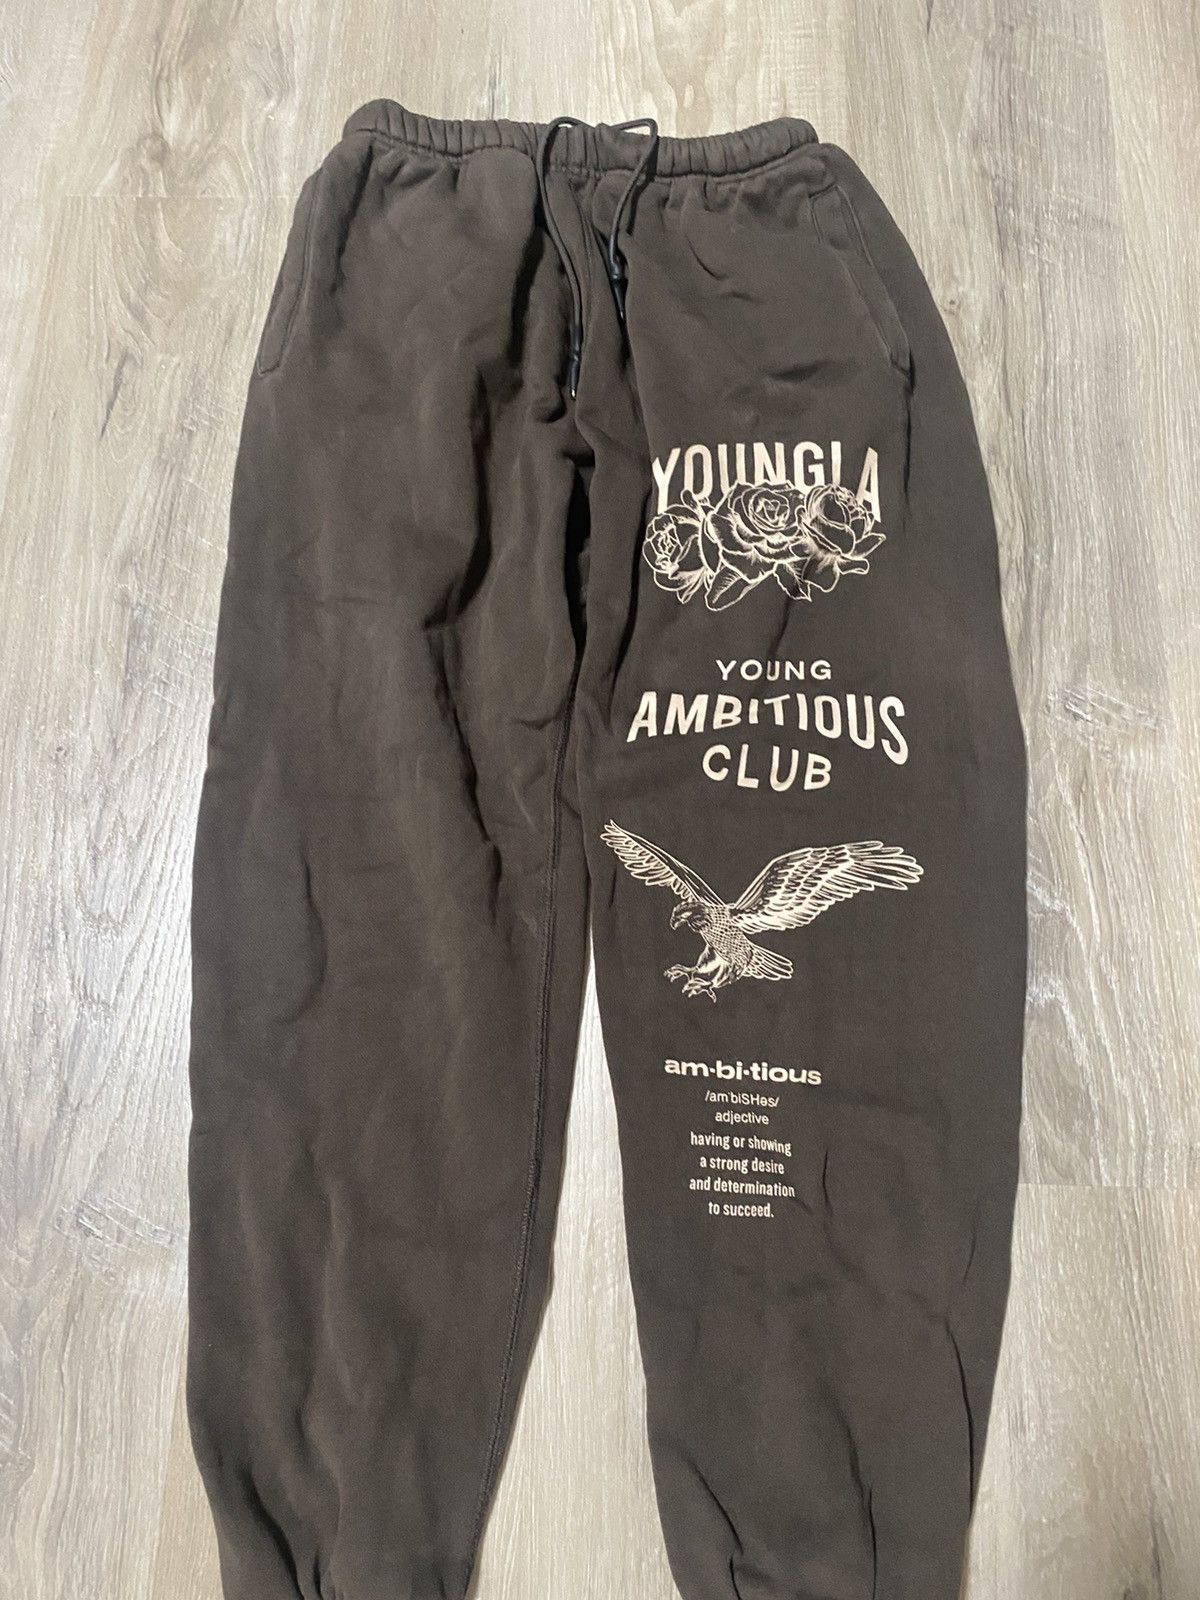 Gymshark Rare Young la immortal joggers ( SOLD OUT )